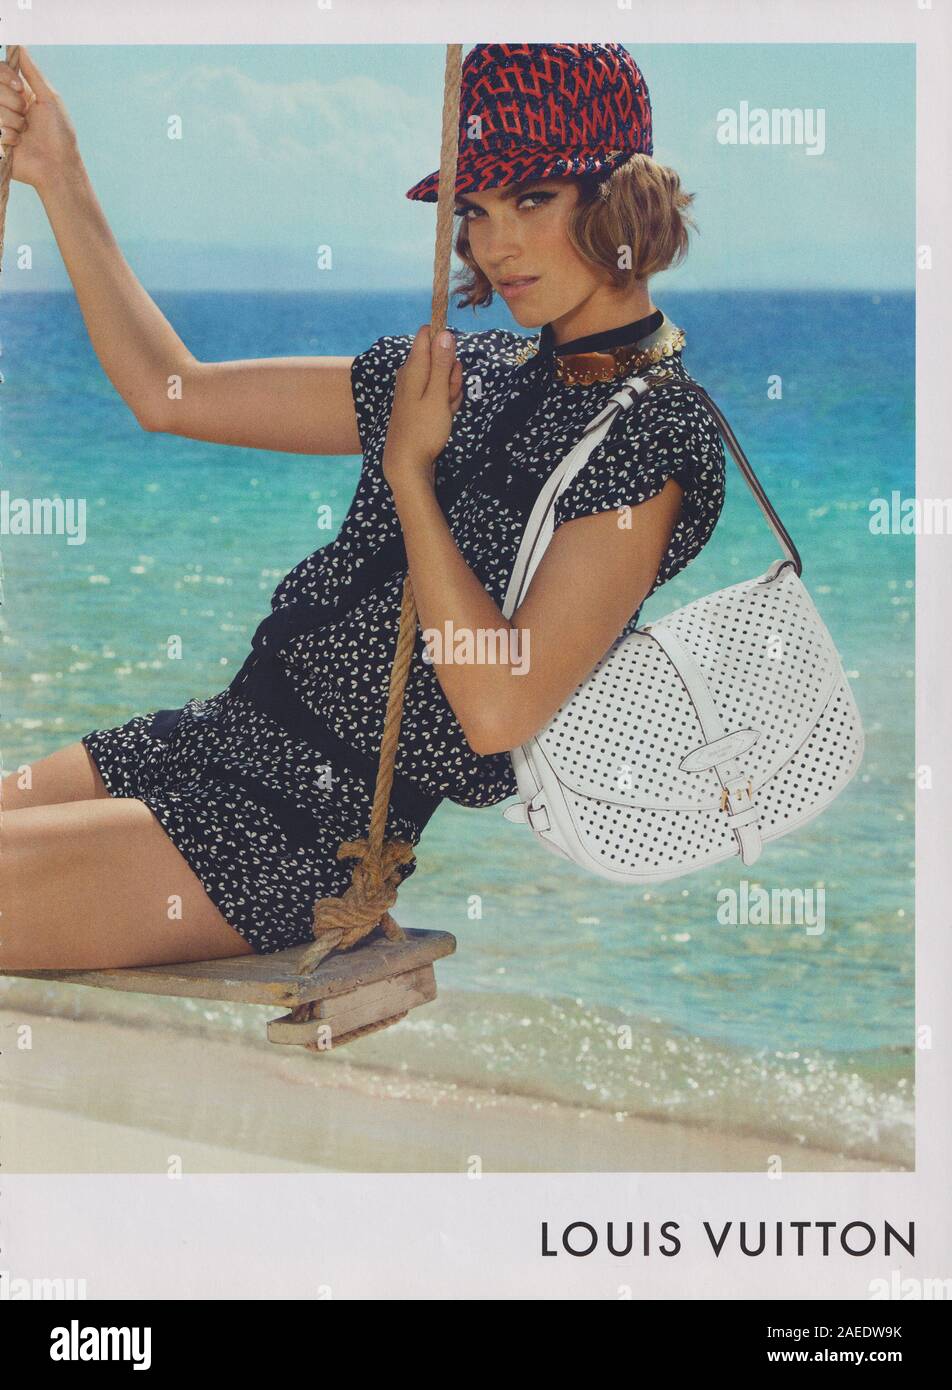 poster advertising Louis Vuitton handbag in paper magazine from 2013 year,  advertisement, creative LV Louis Vuitton advert from 2010s Stock Photo -  Alamy